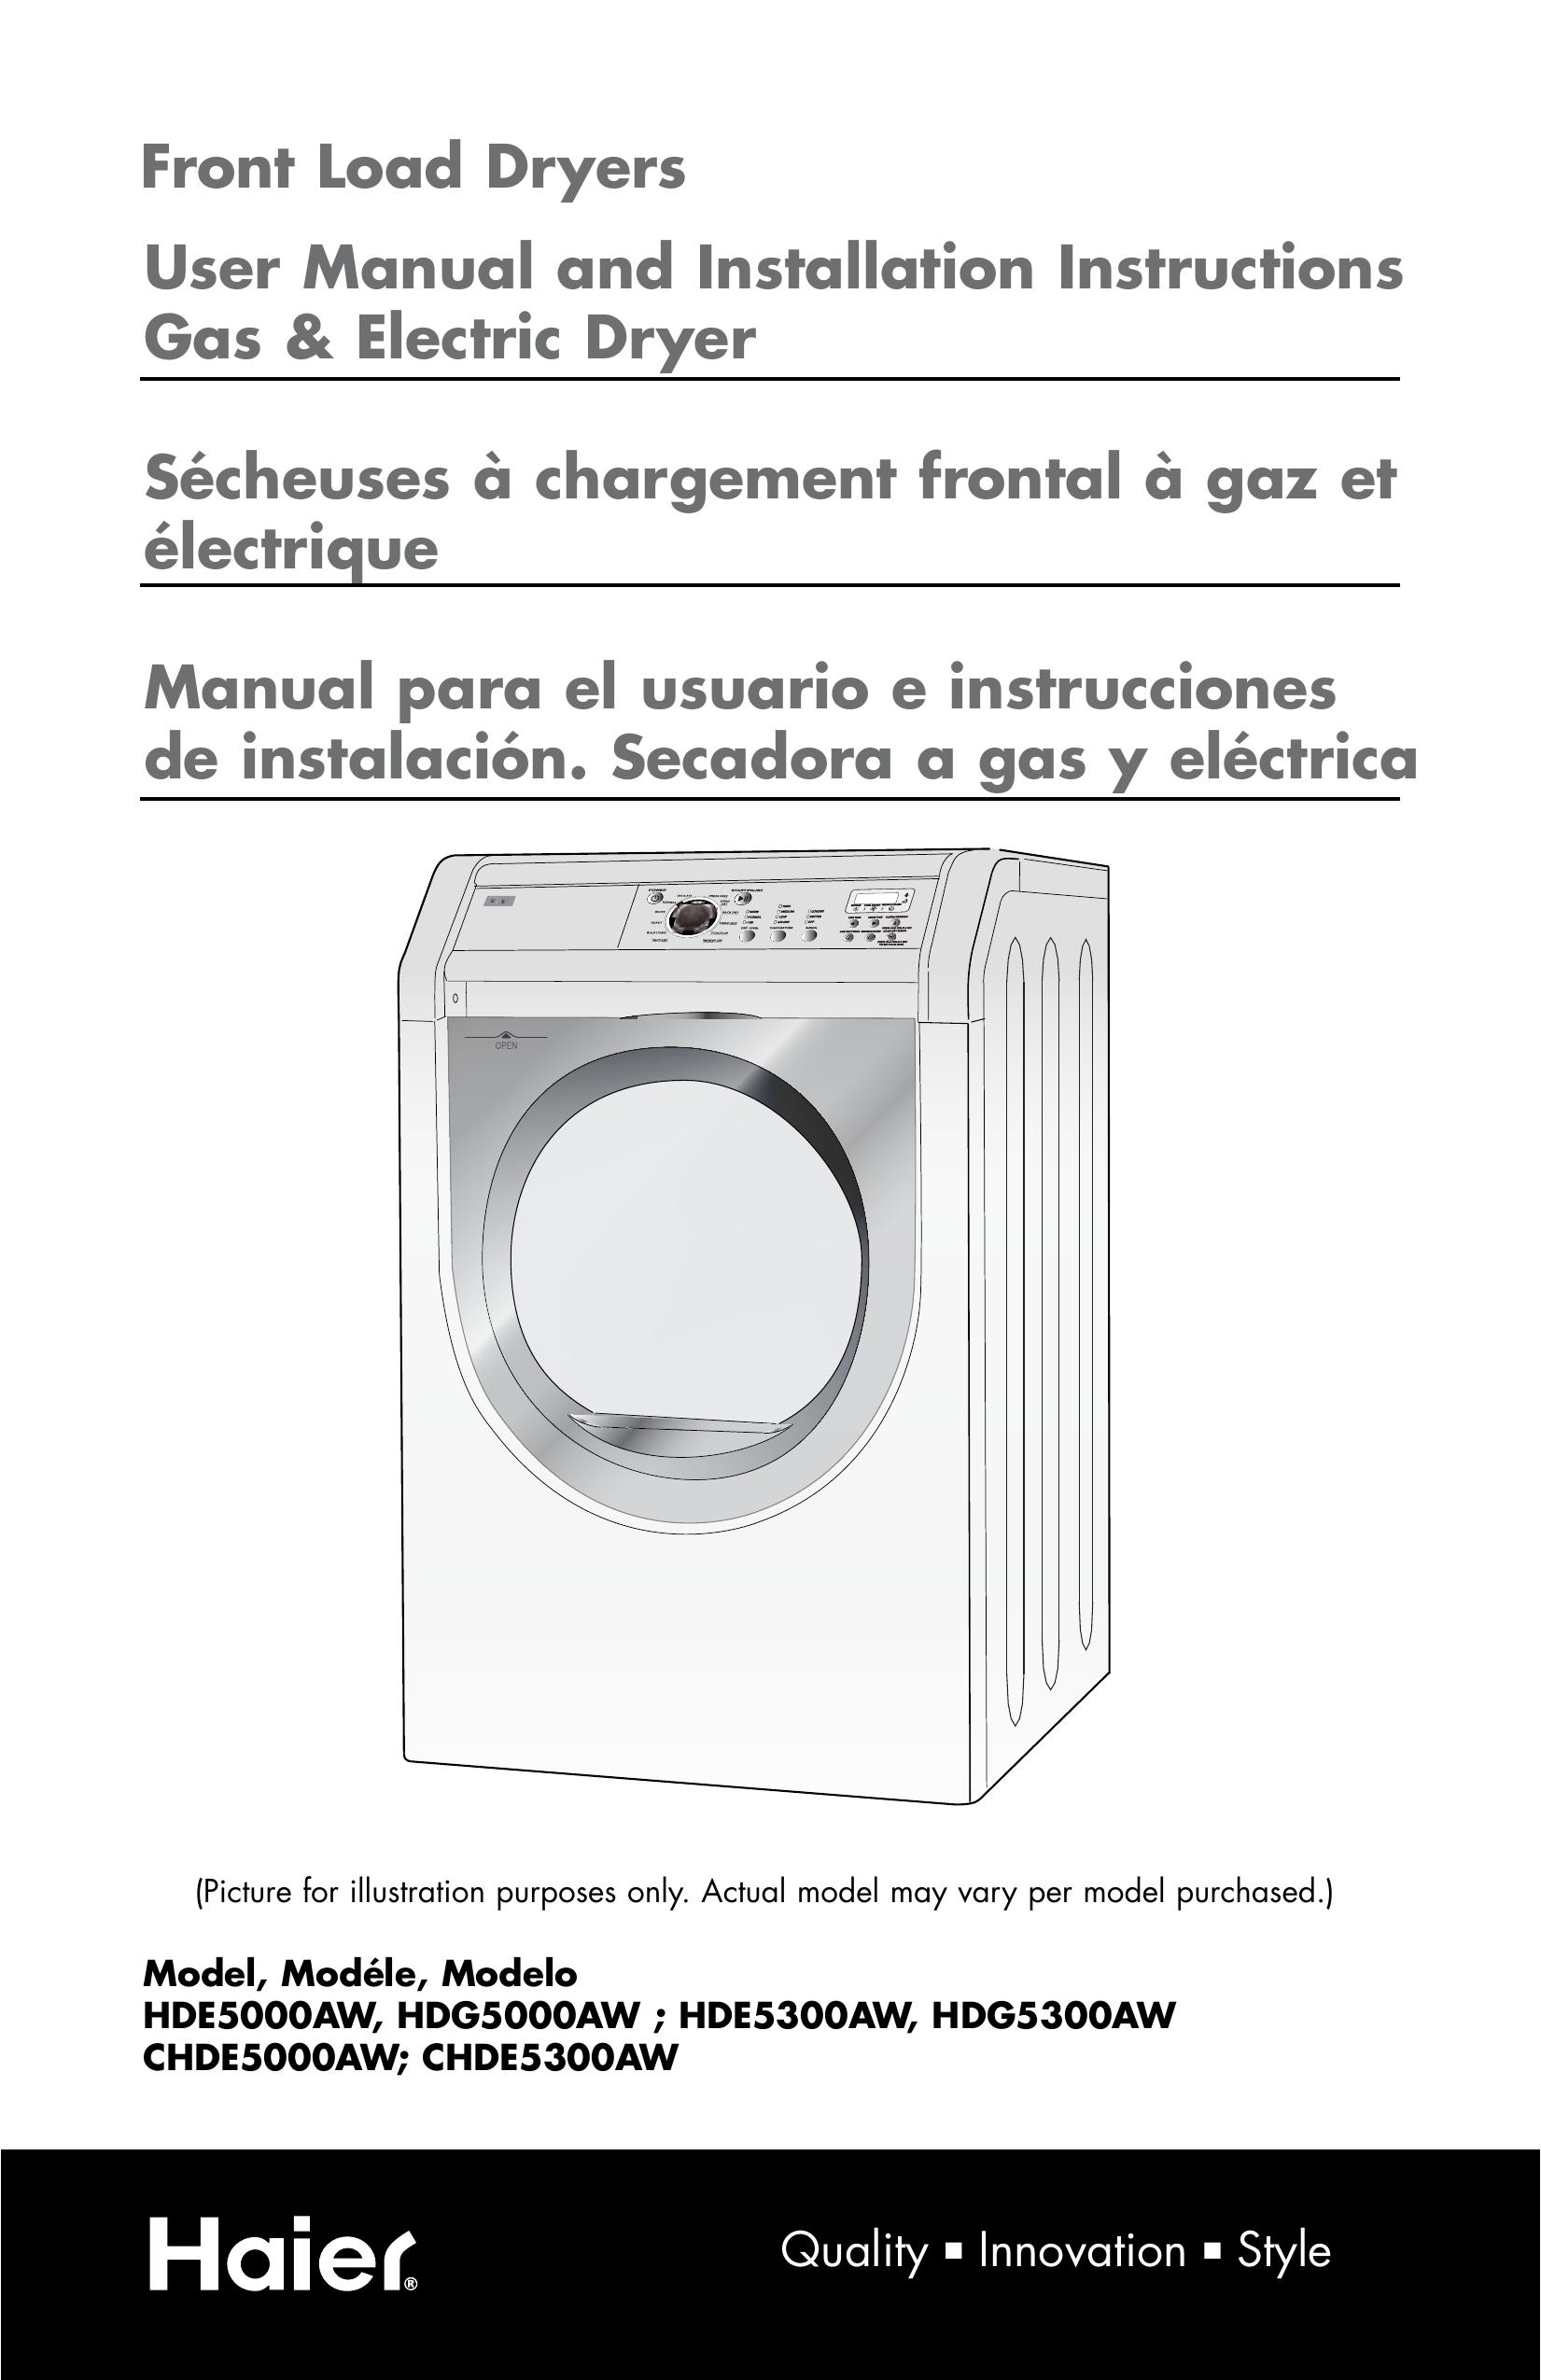 Haier HDG5000AW Clothes Dryer User Manual